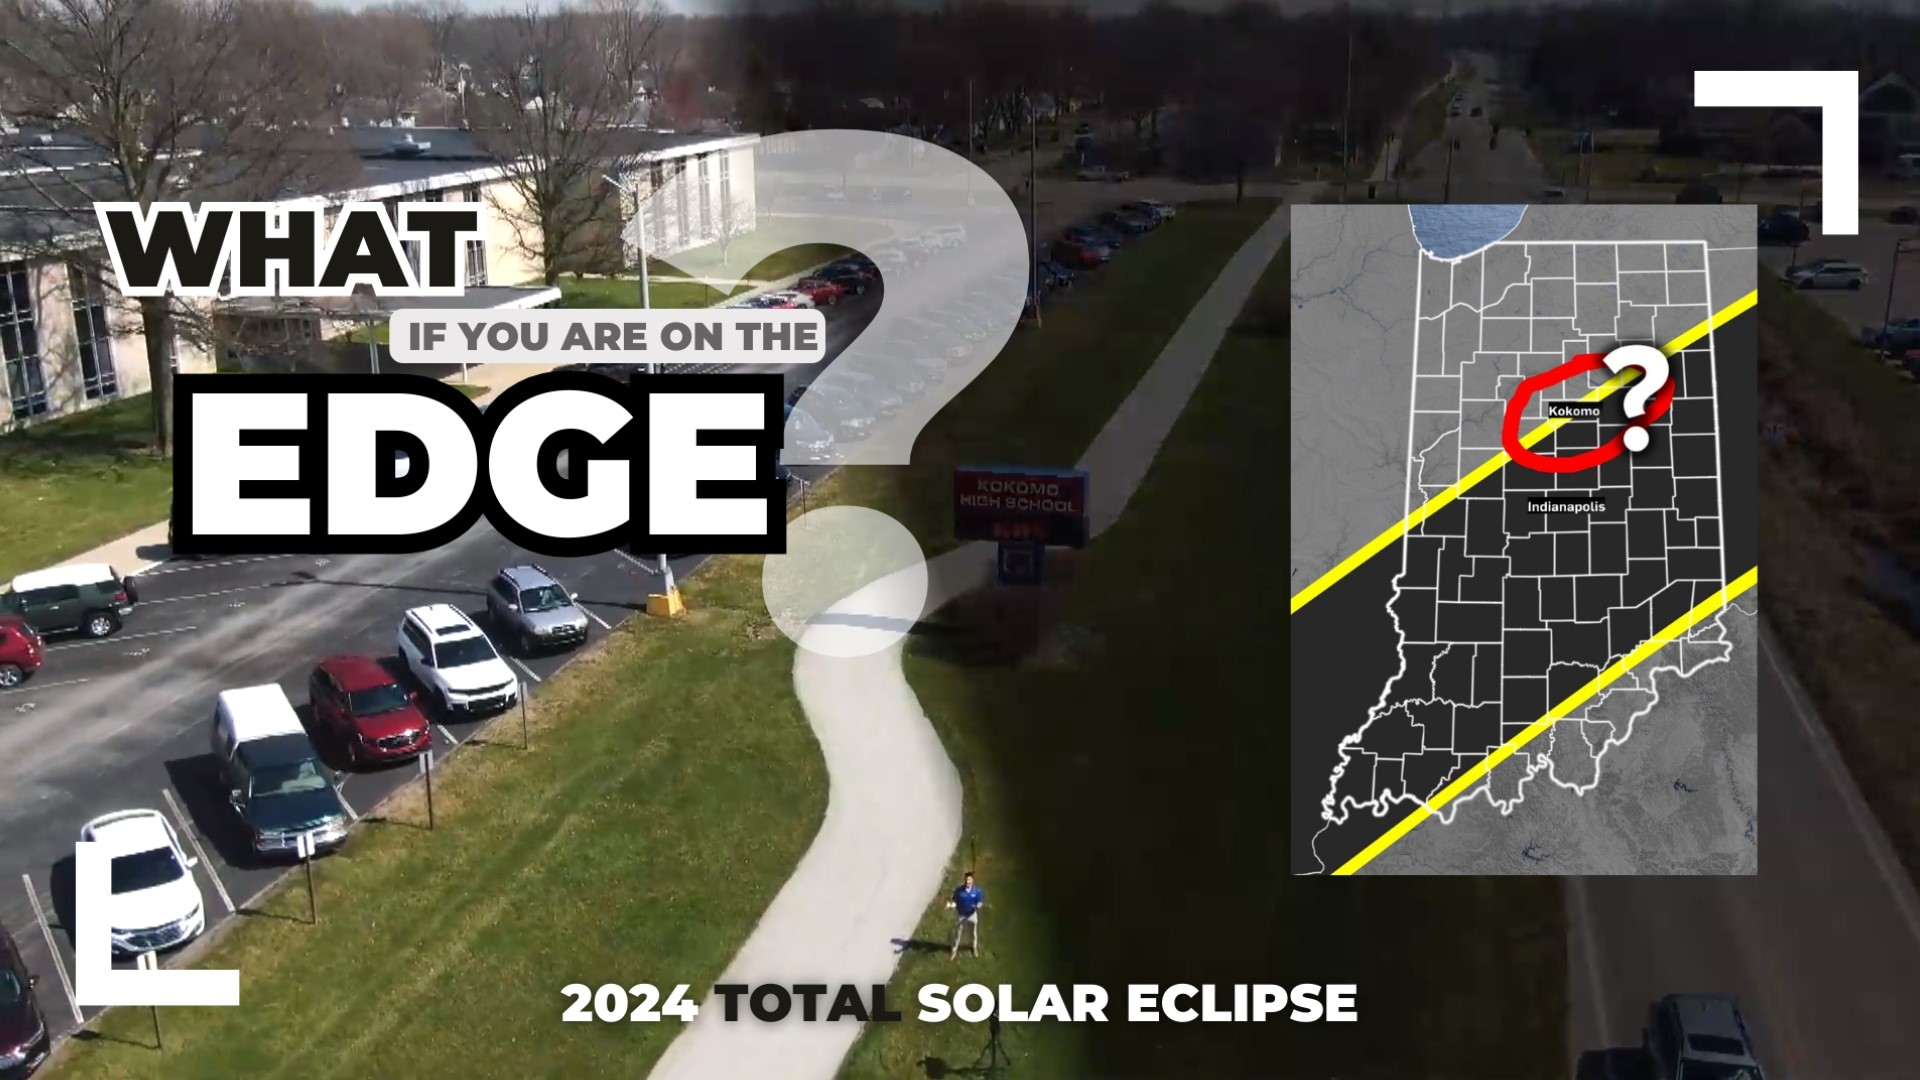 Edge of totality | What will it be like in Kokomo, Indiana?